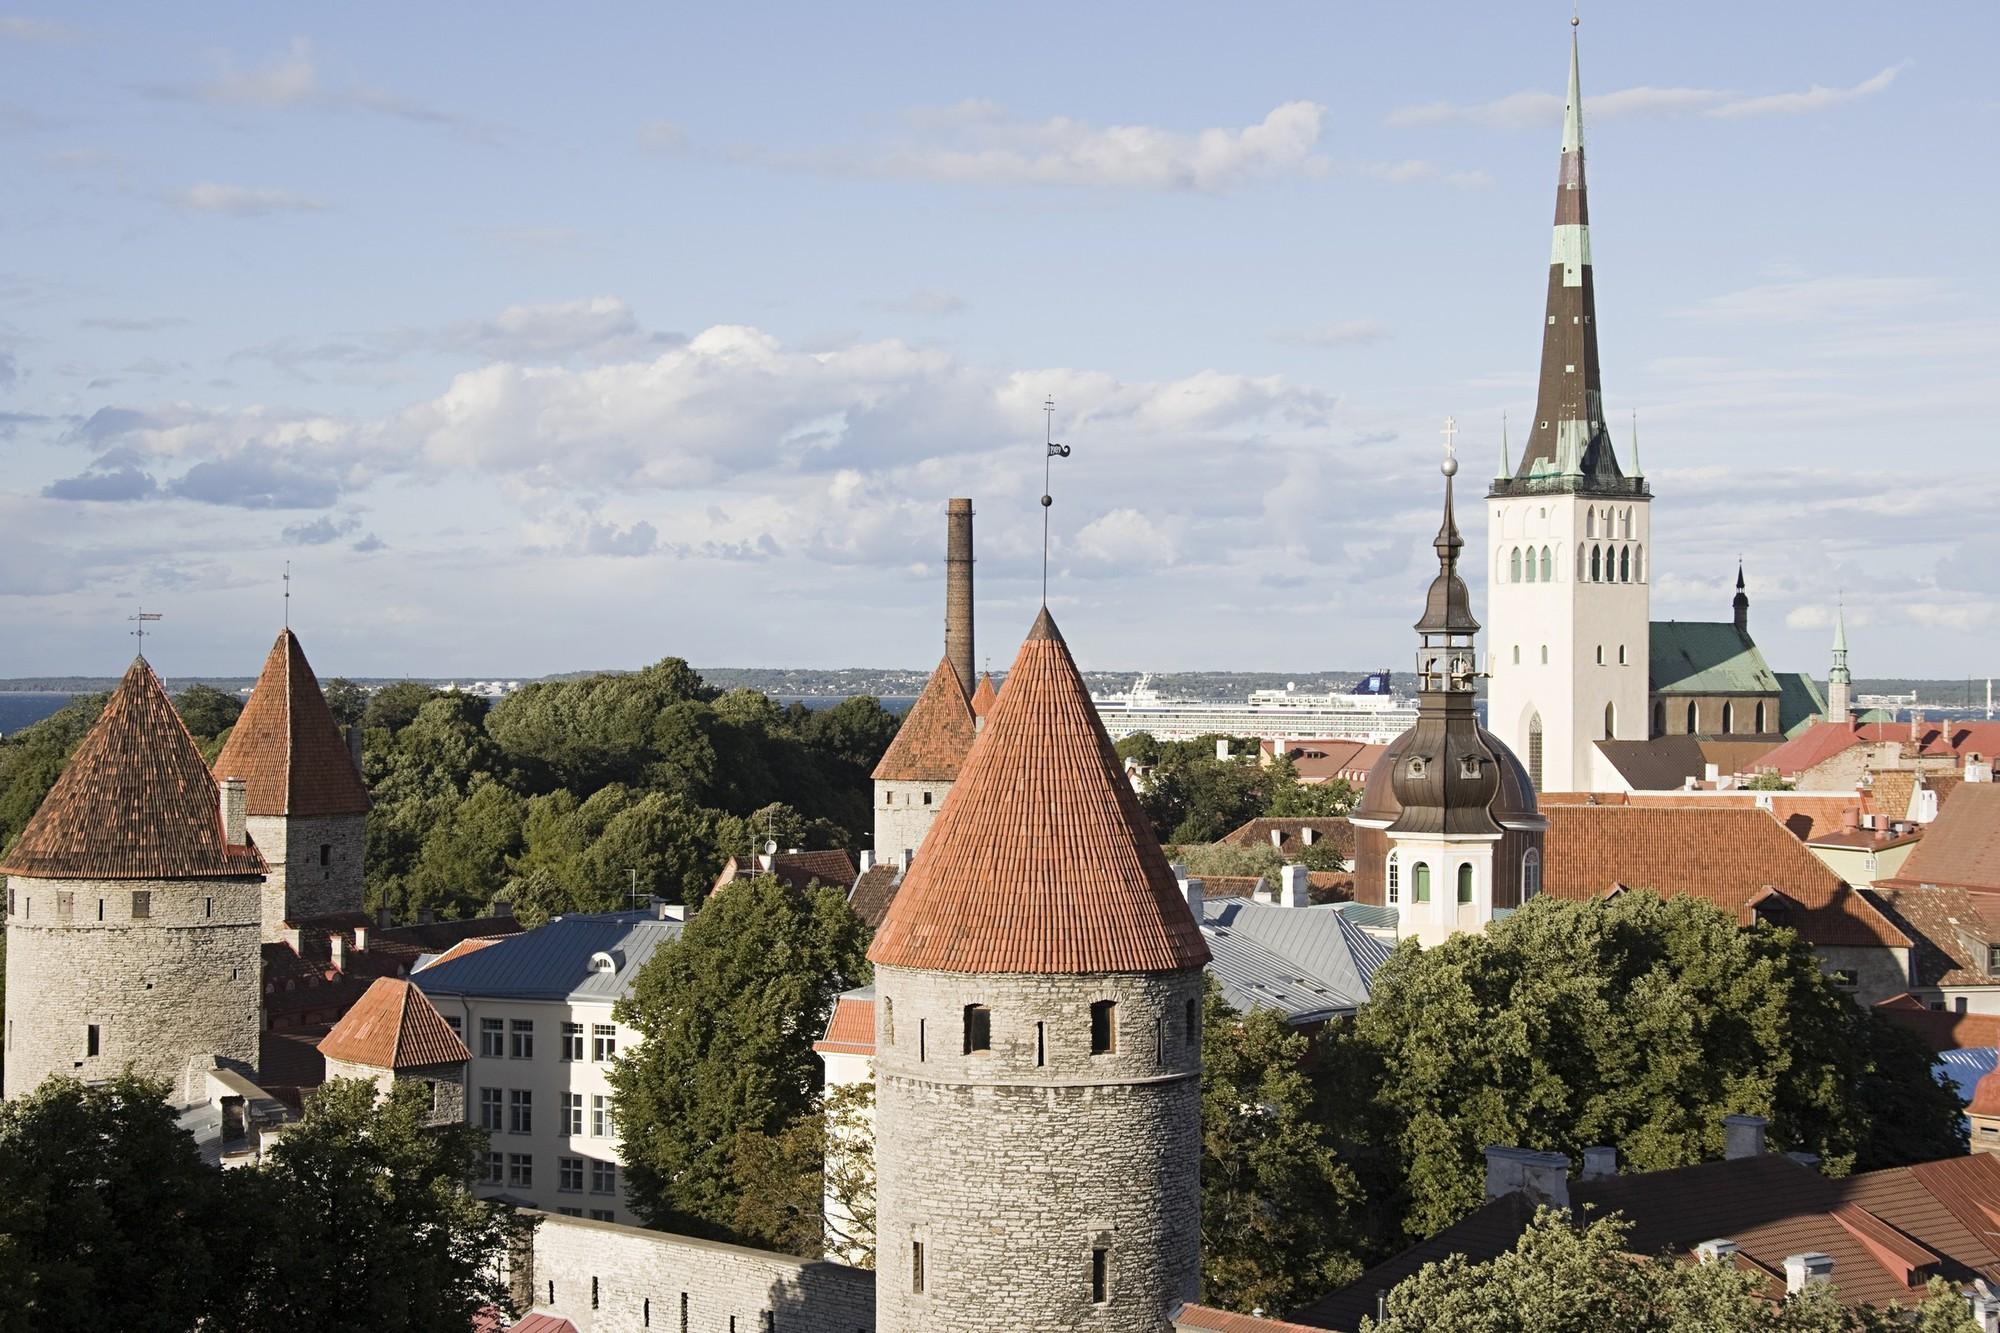 Trees cityscapes architecture day europe tallinn wallpaper